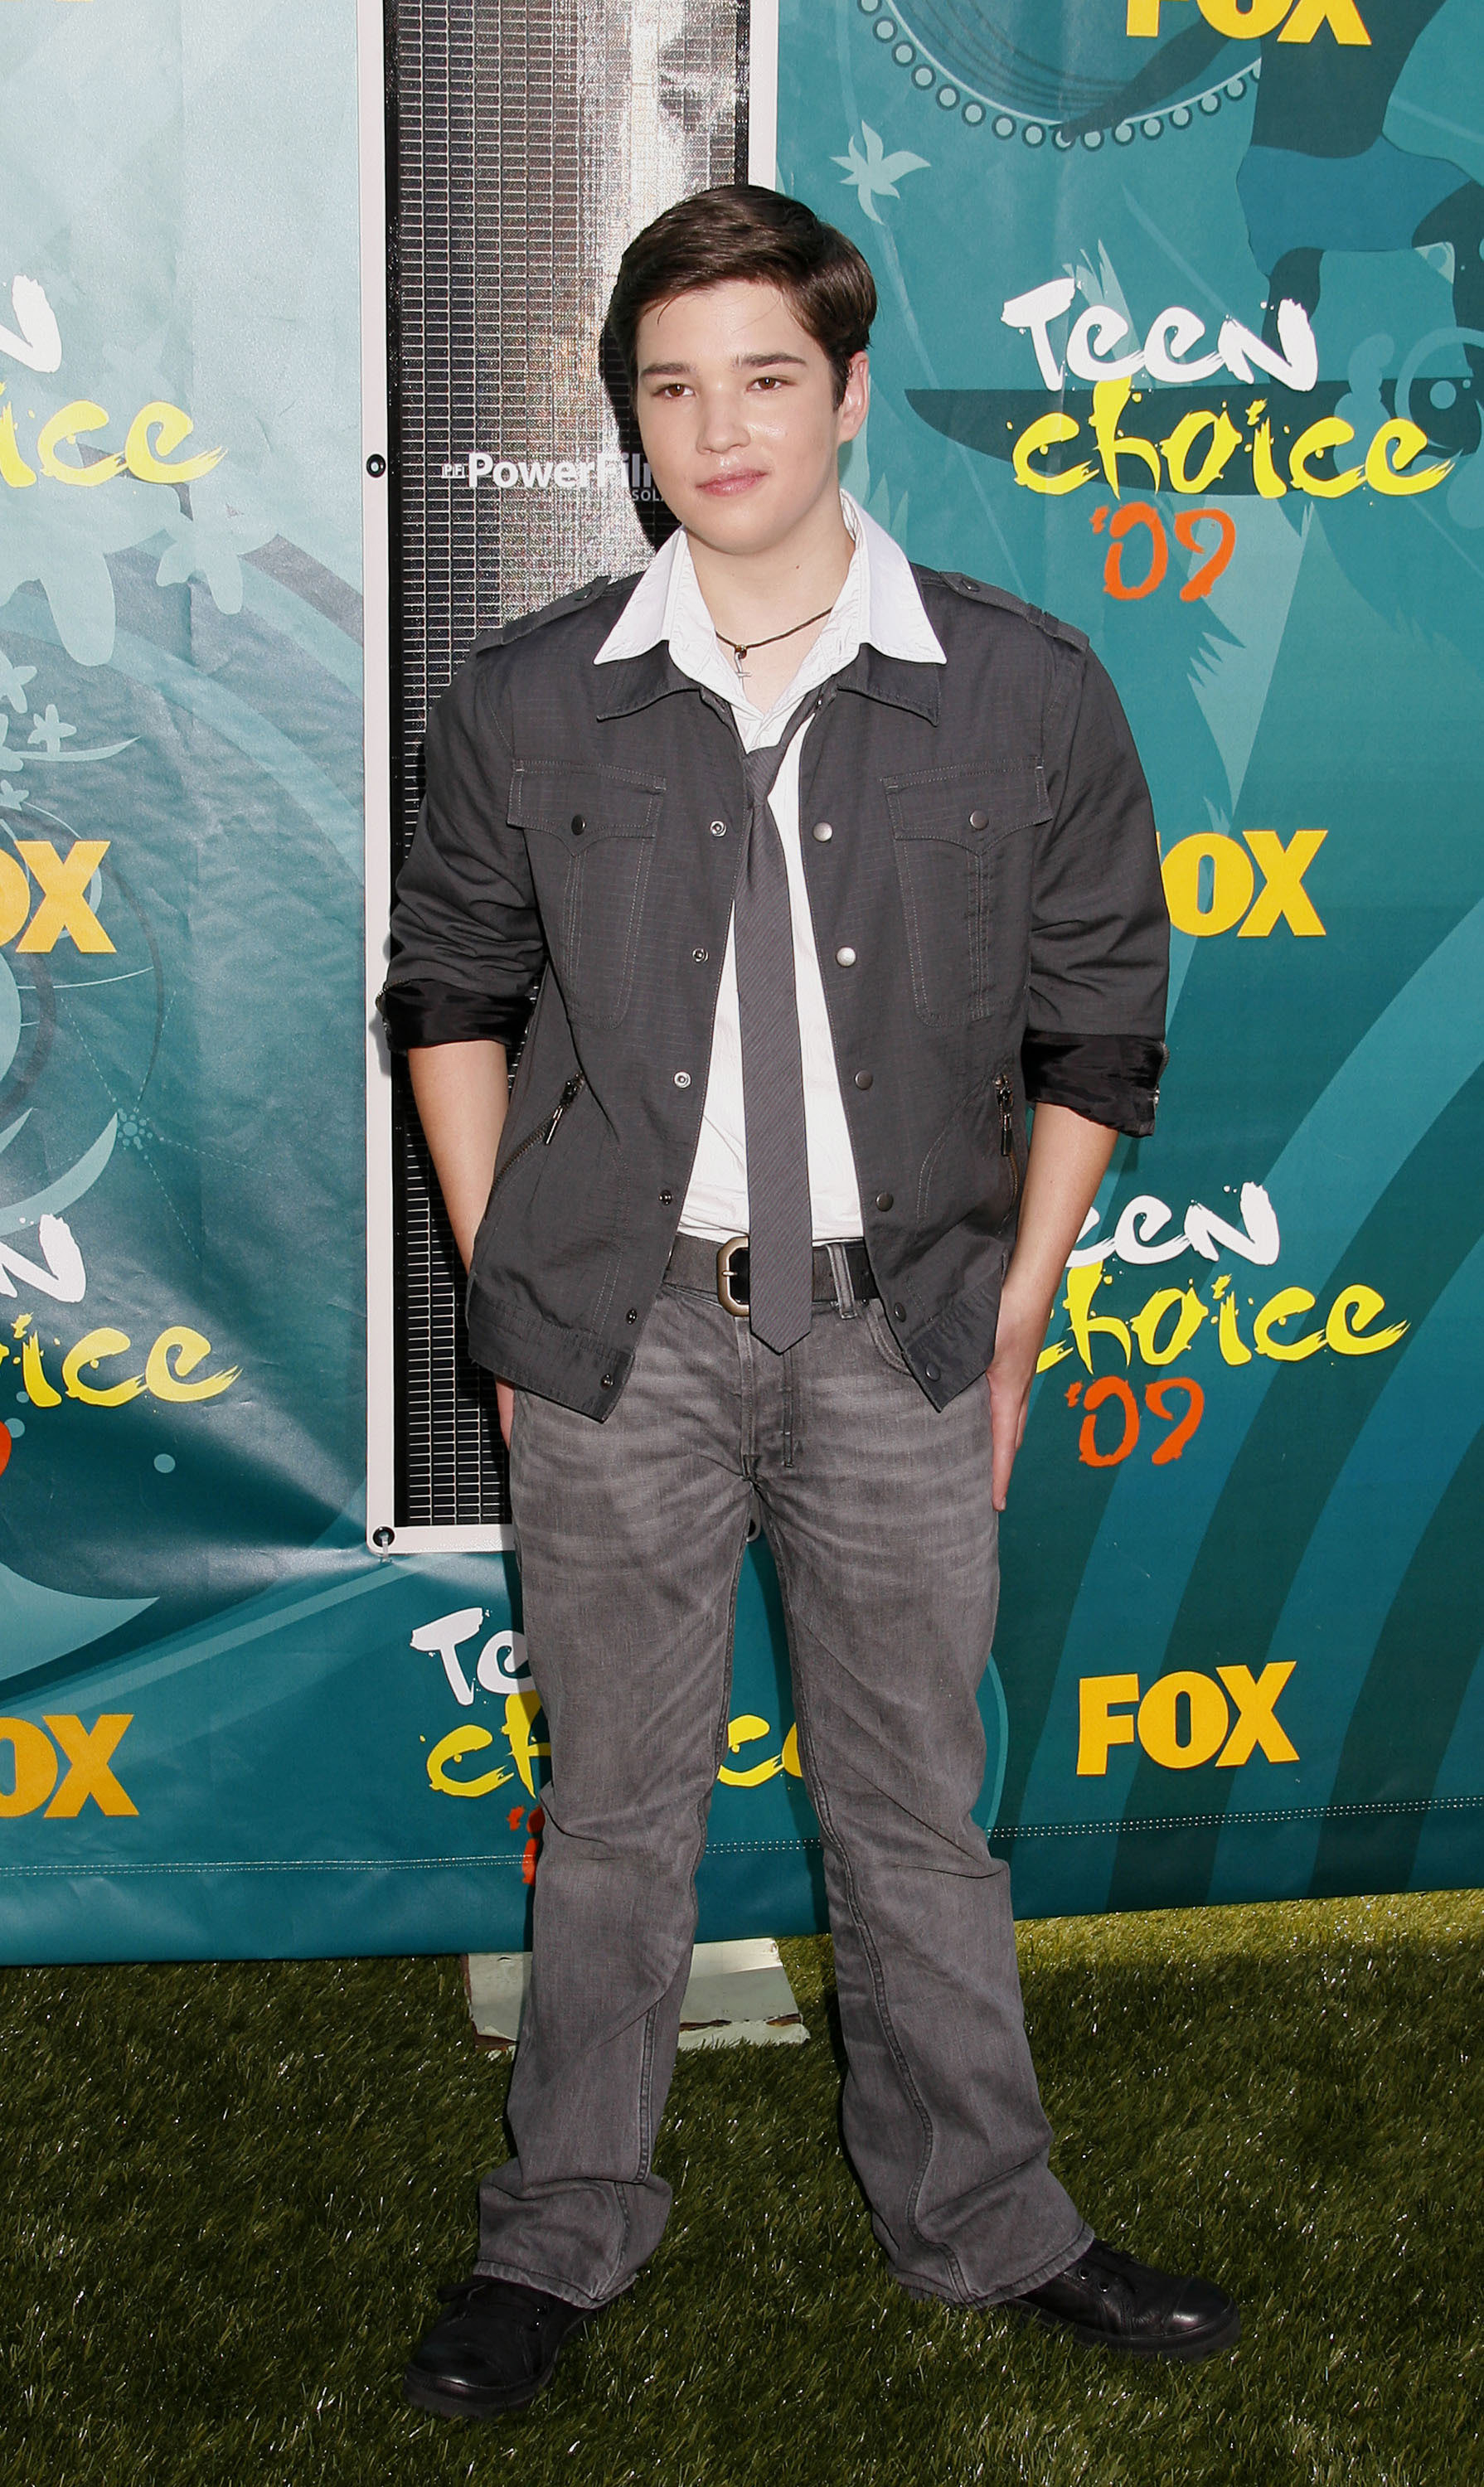 Nathan in jeans and a shirt, tie, and open jacket